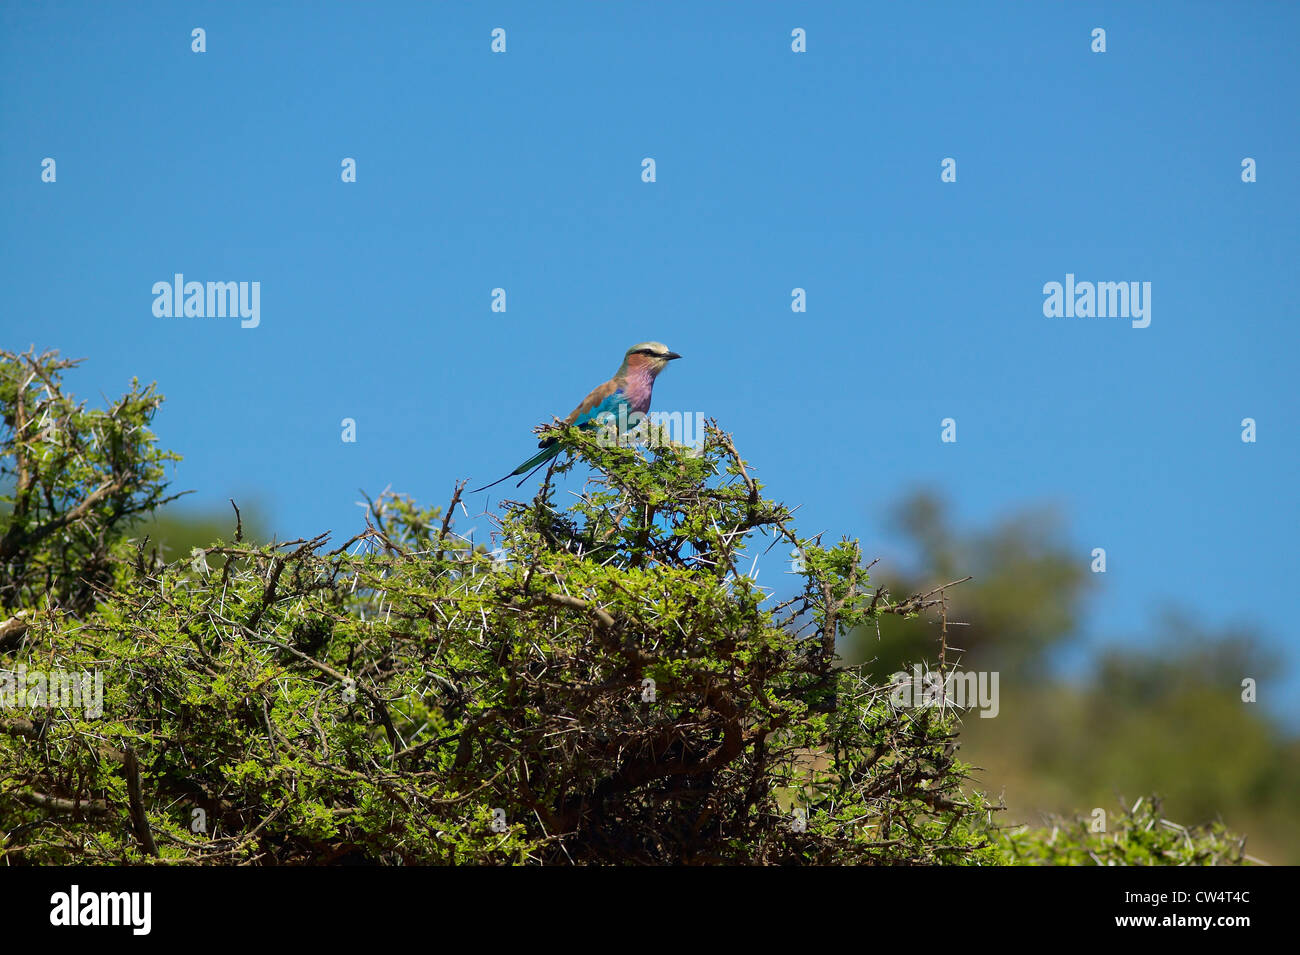 Multi-colored bird singing on tree in Kenya, Africa on the Lewa Conservancy Stock Photo